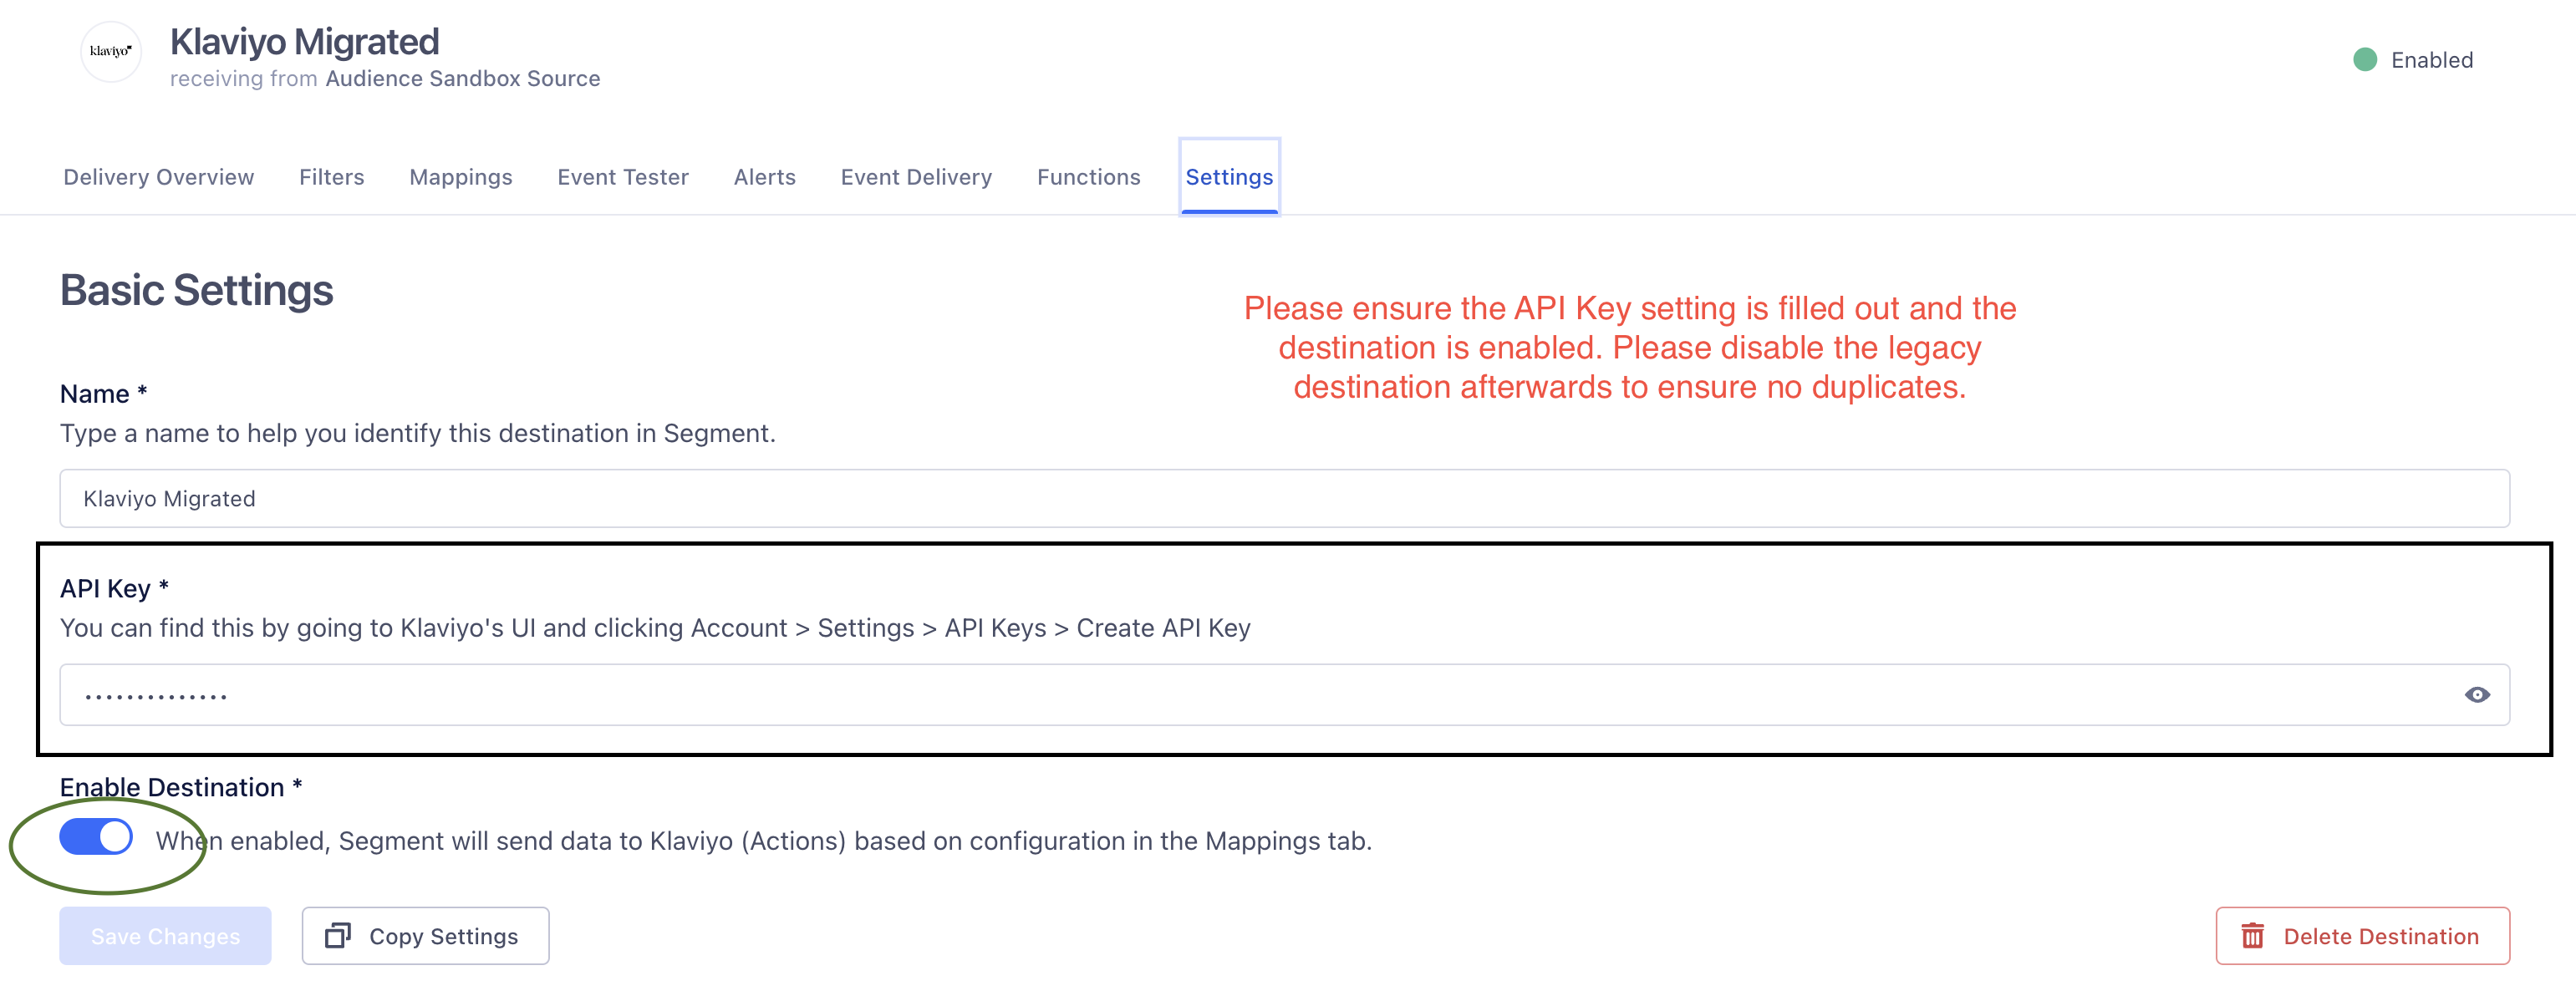 A screenshot of the Settings page for a migrated Klaviyo Actions destination, with a black outline around the API Key field